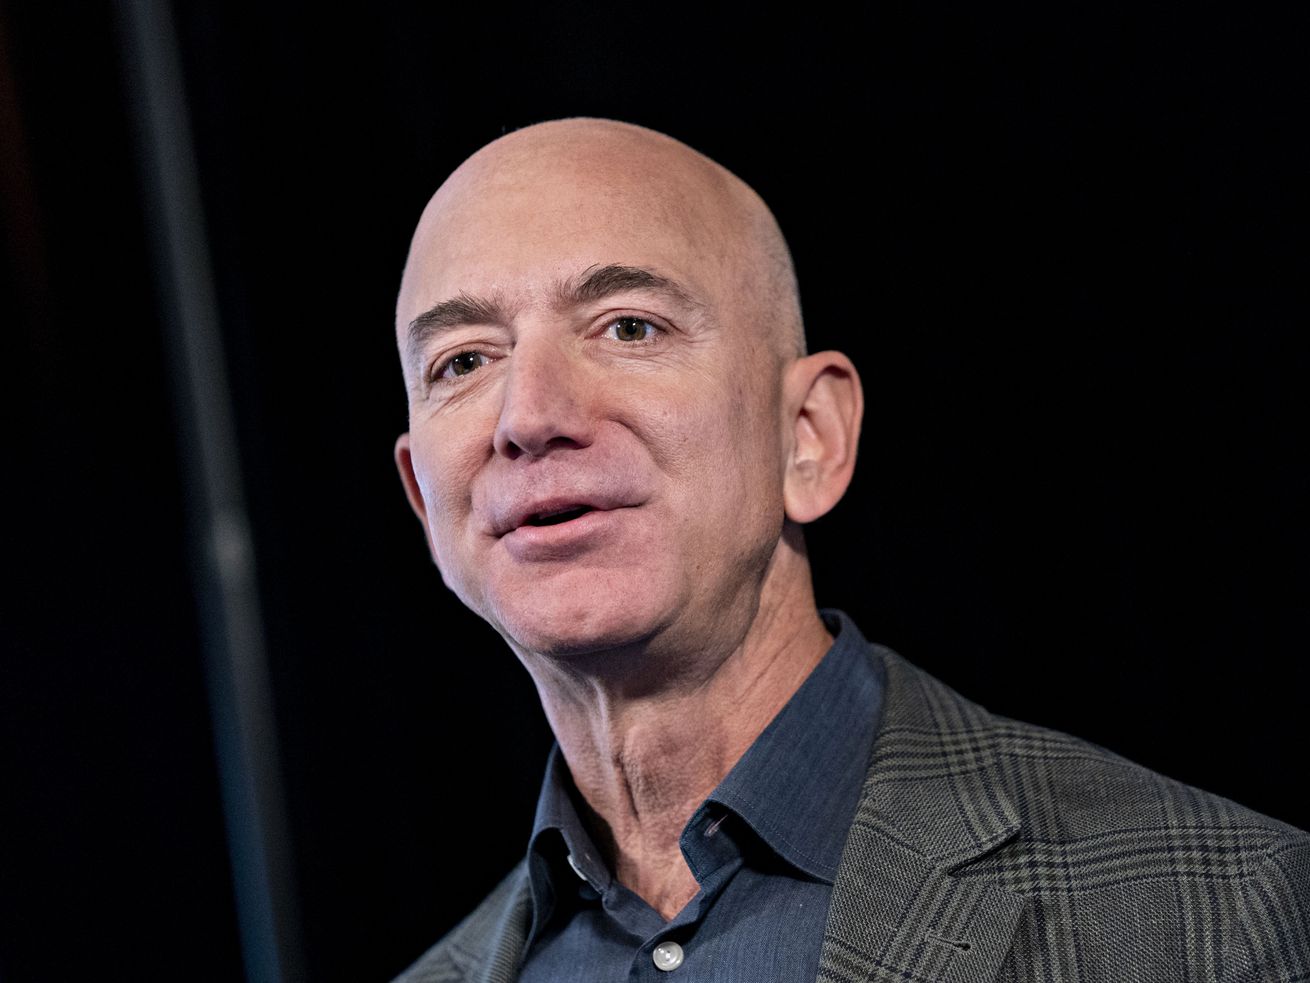 A close-up of Amazon CEO Jeff Bezos’s face with a neutral expression.